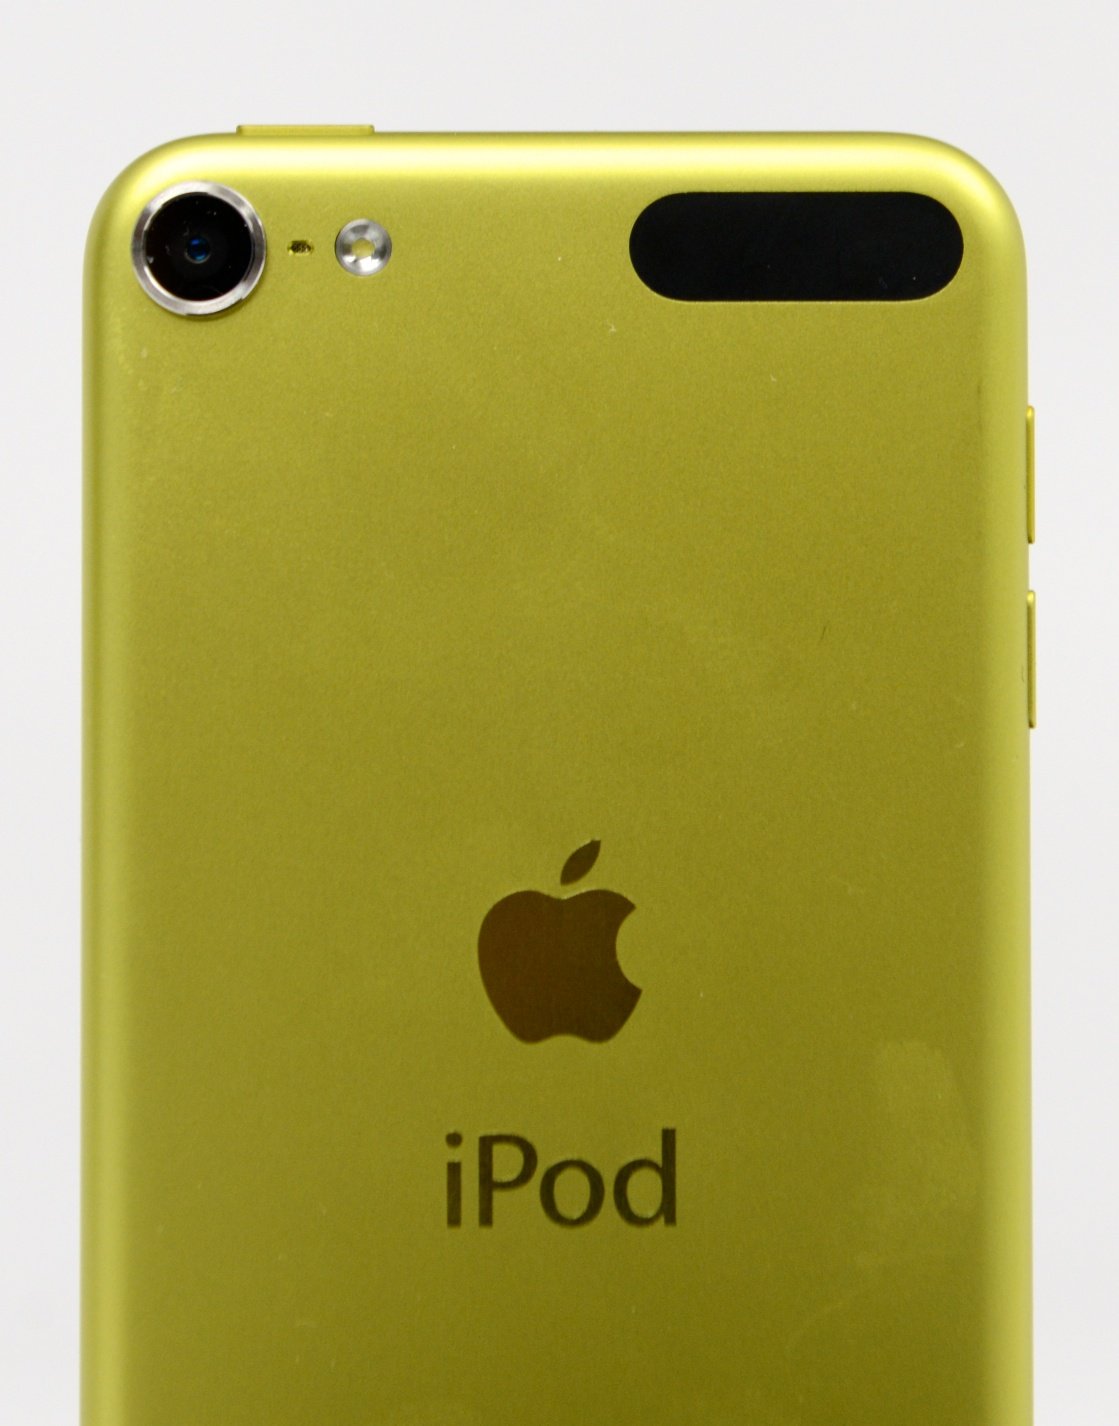 The iPod touch 6th generation release is not coming in 2014 according to an analyst report.